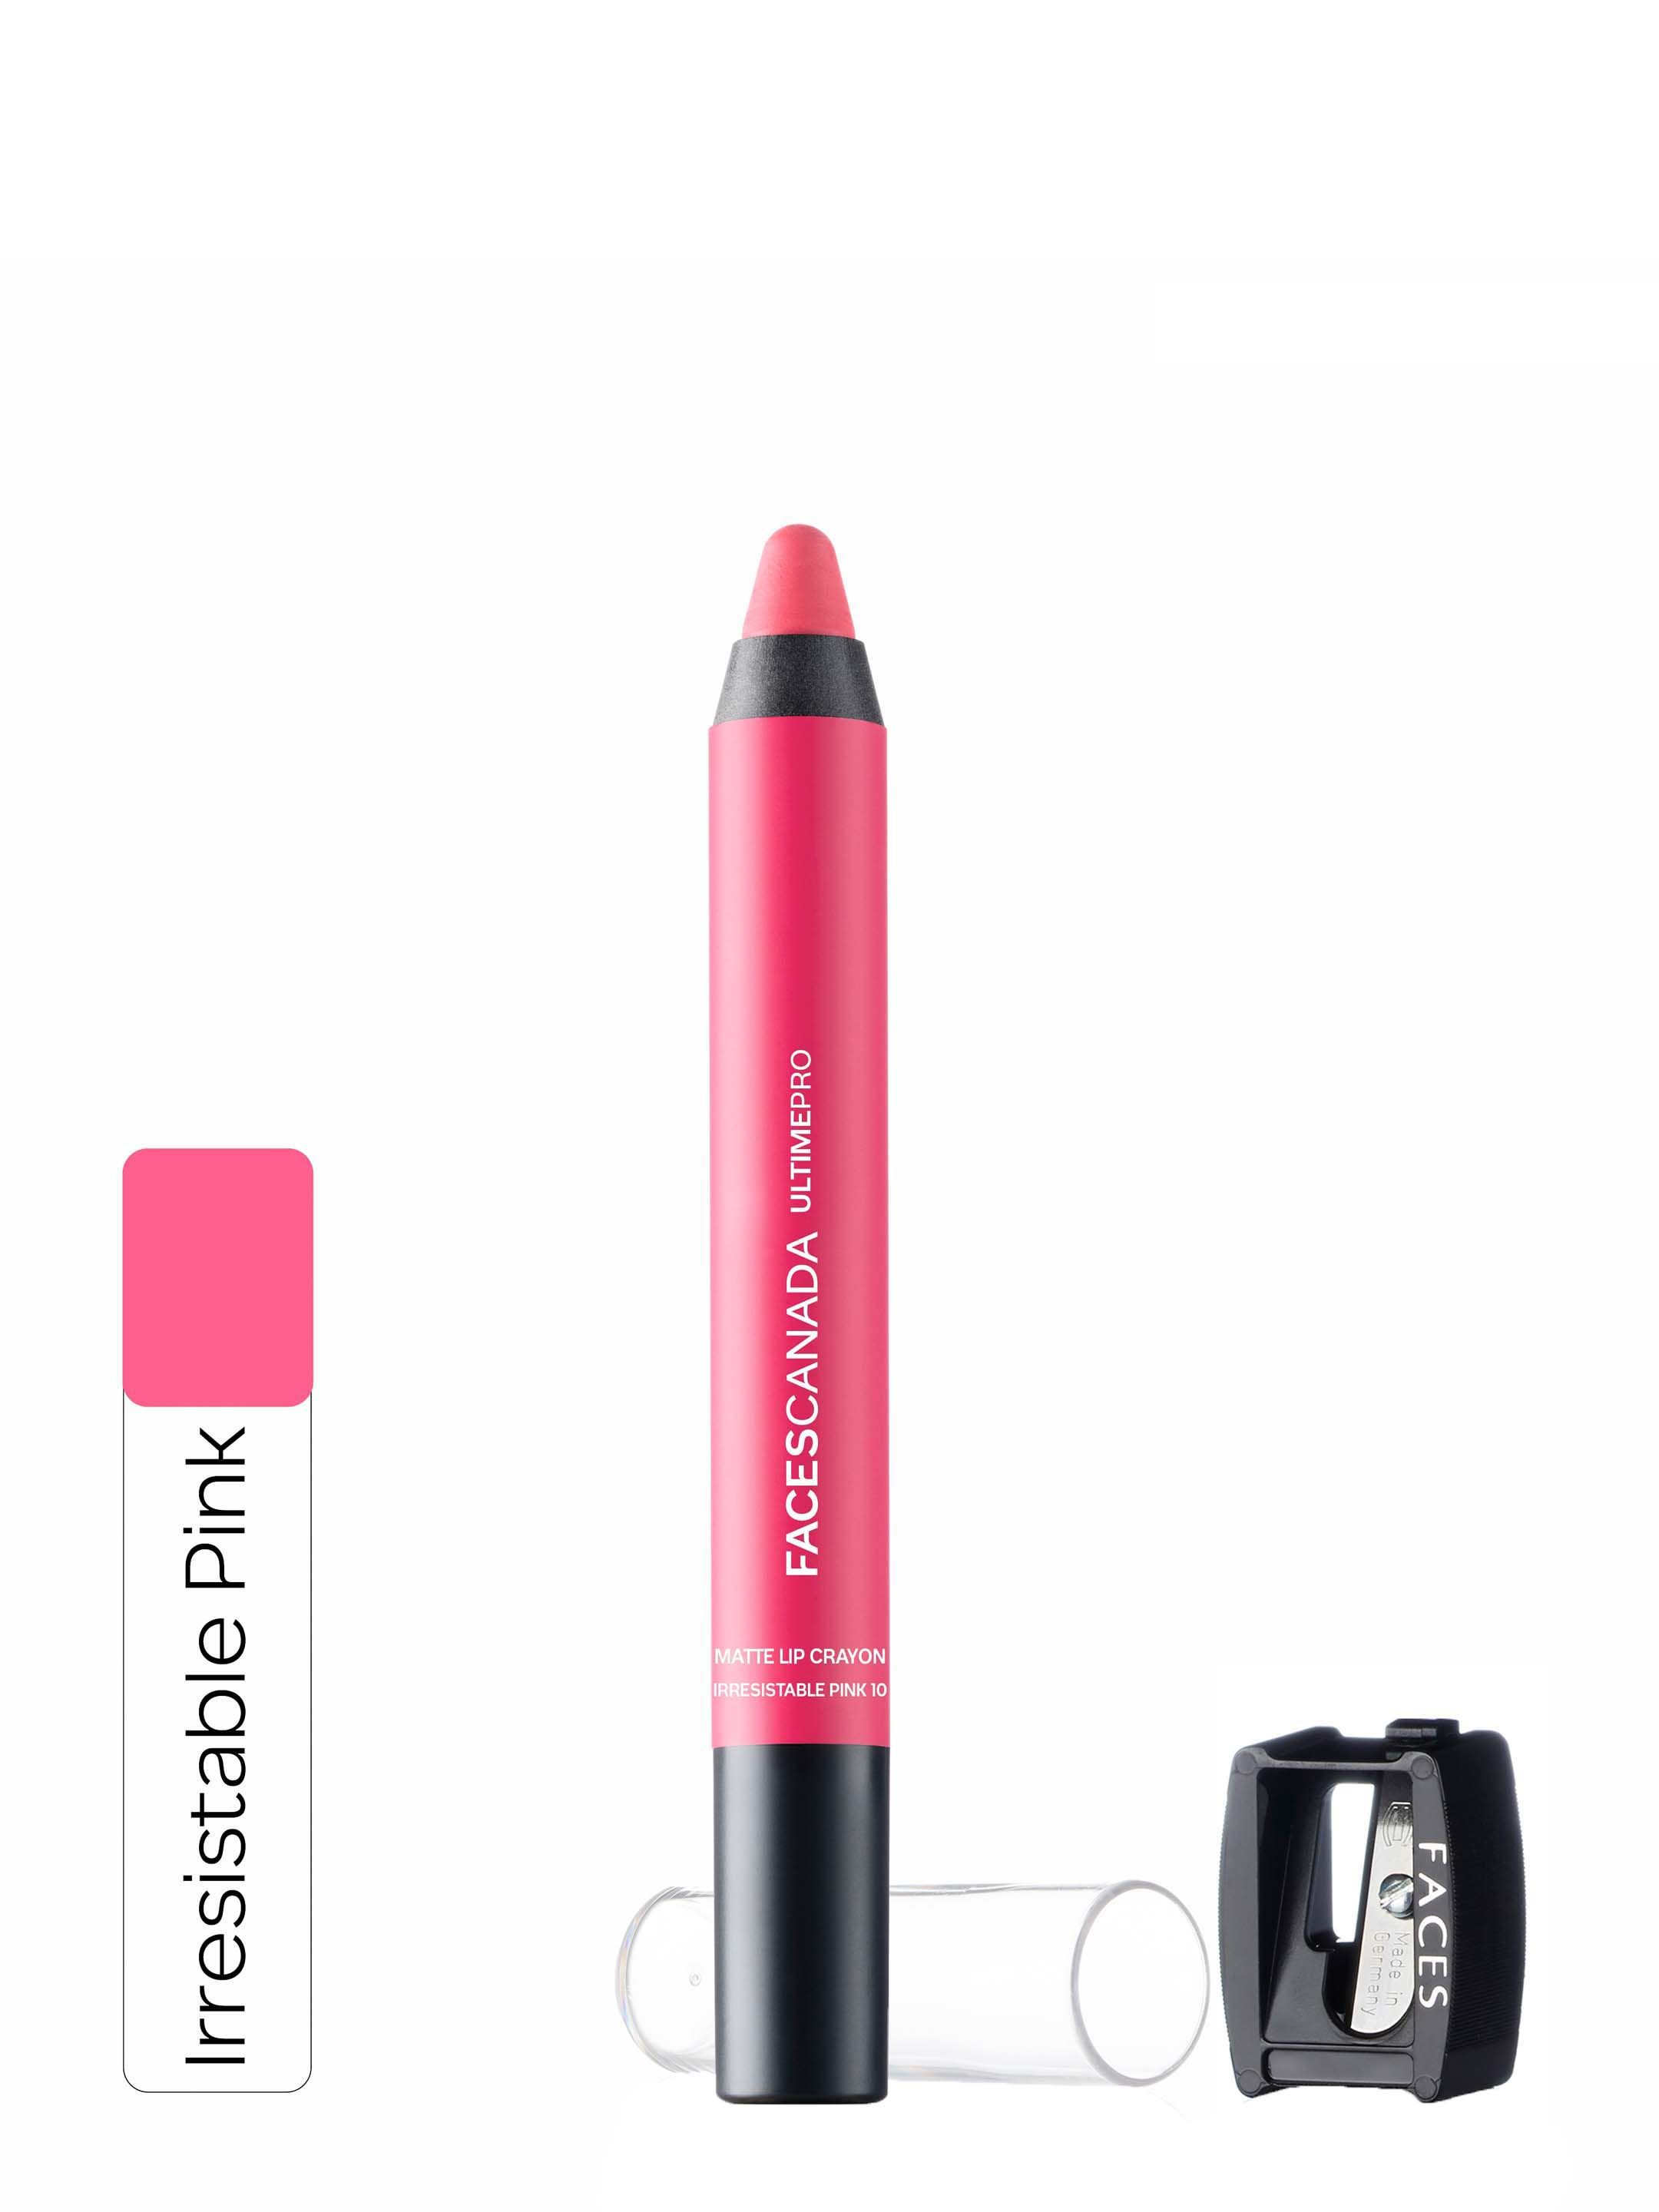 FACES CANADA Ultime Pro Irresistible Pink Matte Lip Crayon 10 Price in India